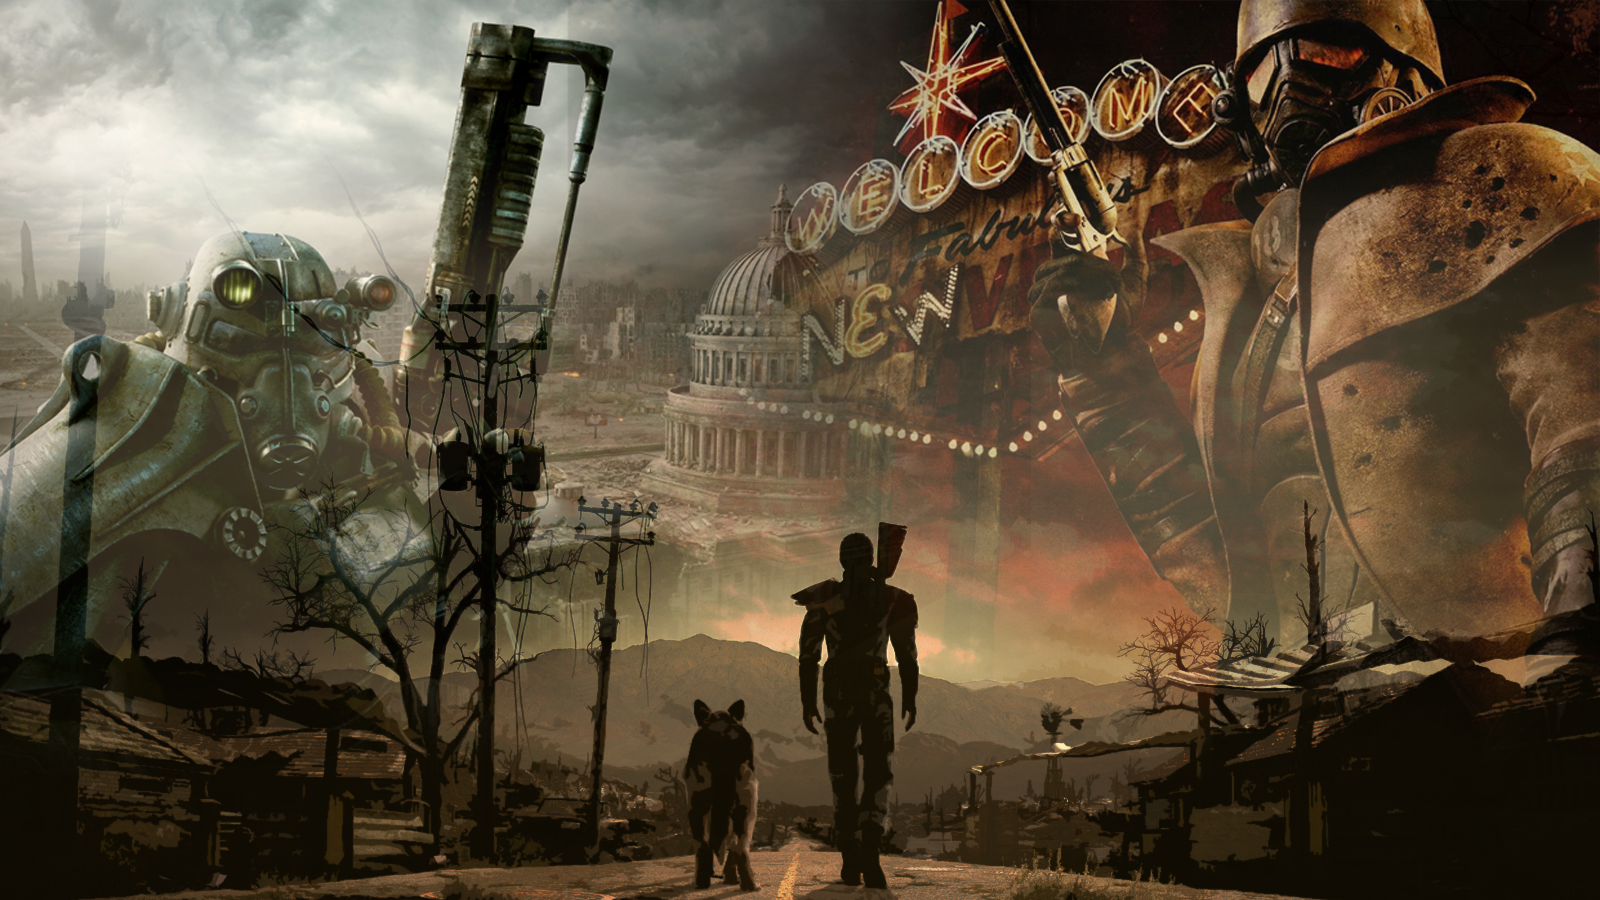 Fallout 3 Tale of two Wastelands. Фоллаут Tale of two Wastelands. Фоллаут 3 Пустошь. Tale of two Wastelands Fallout New Vegas. Fallout new sfw